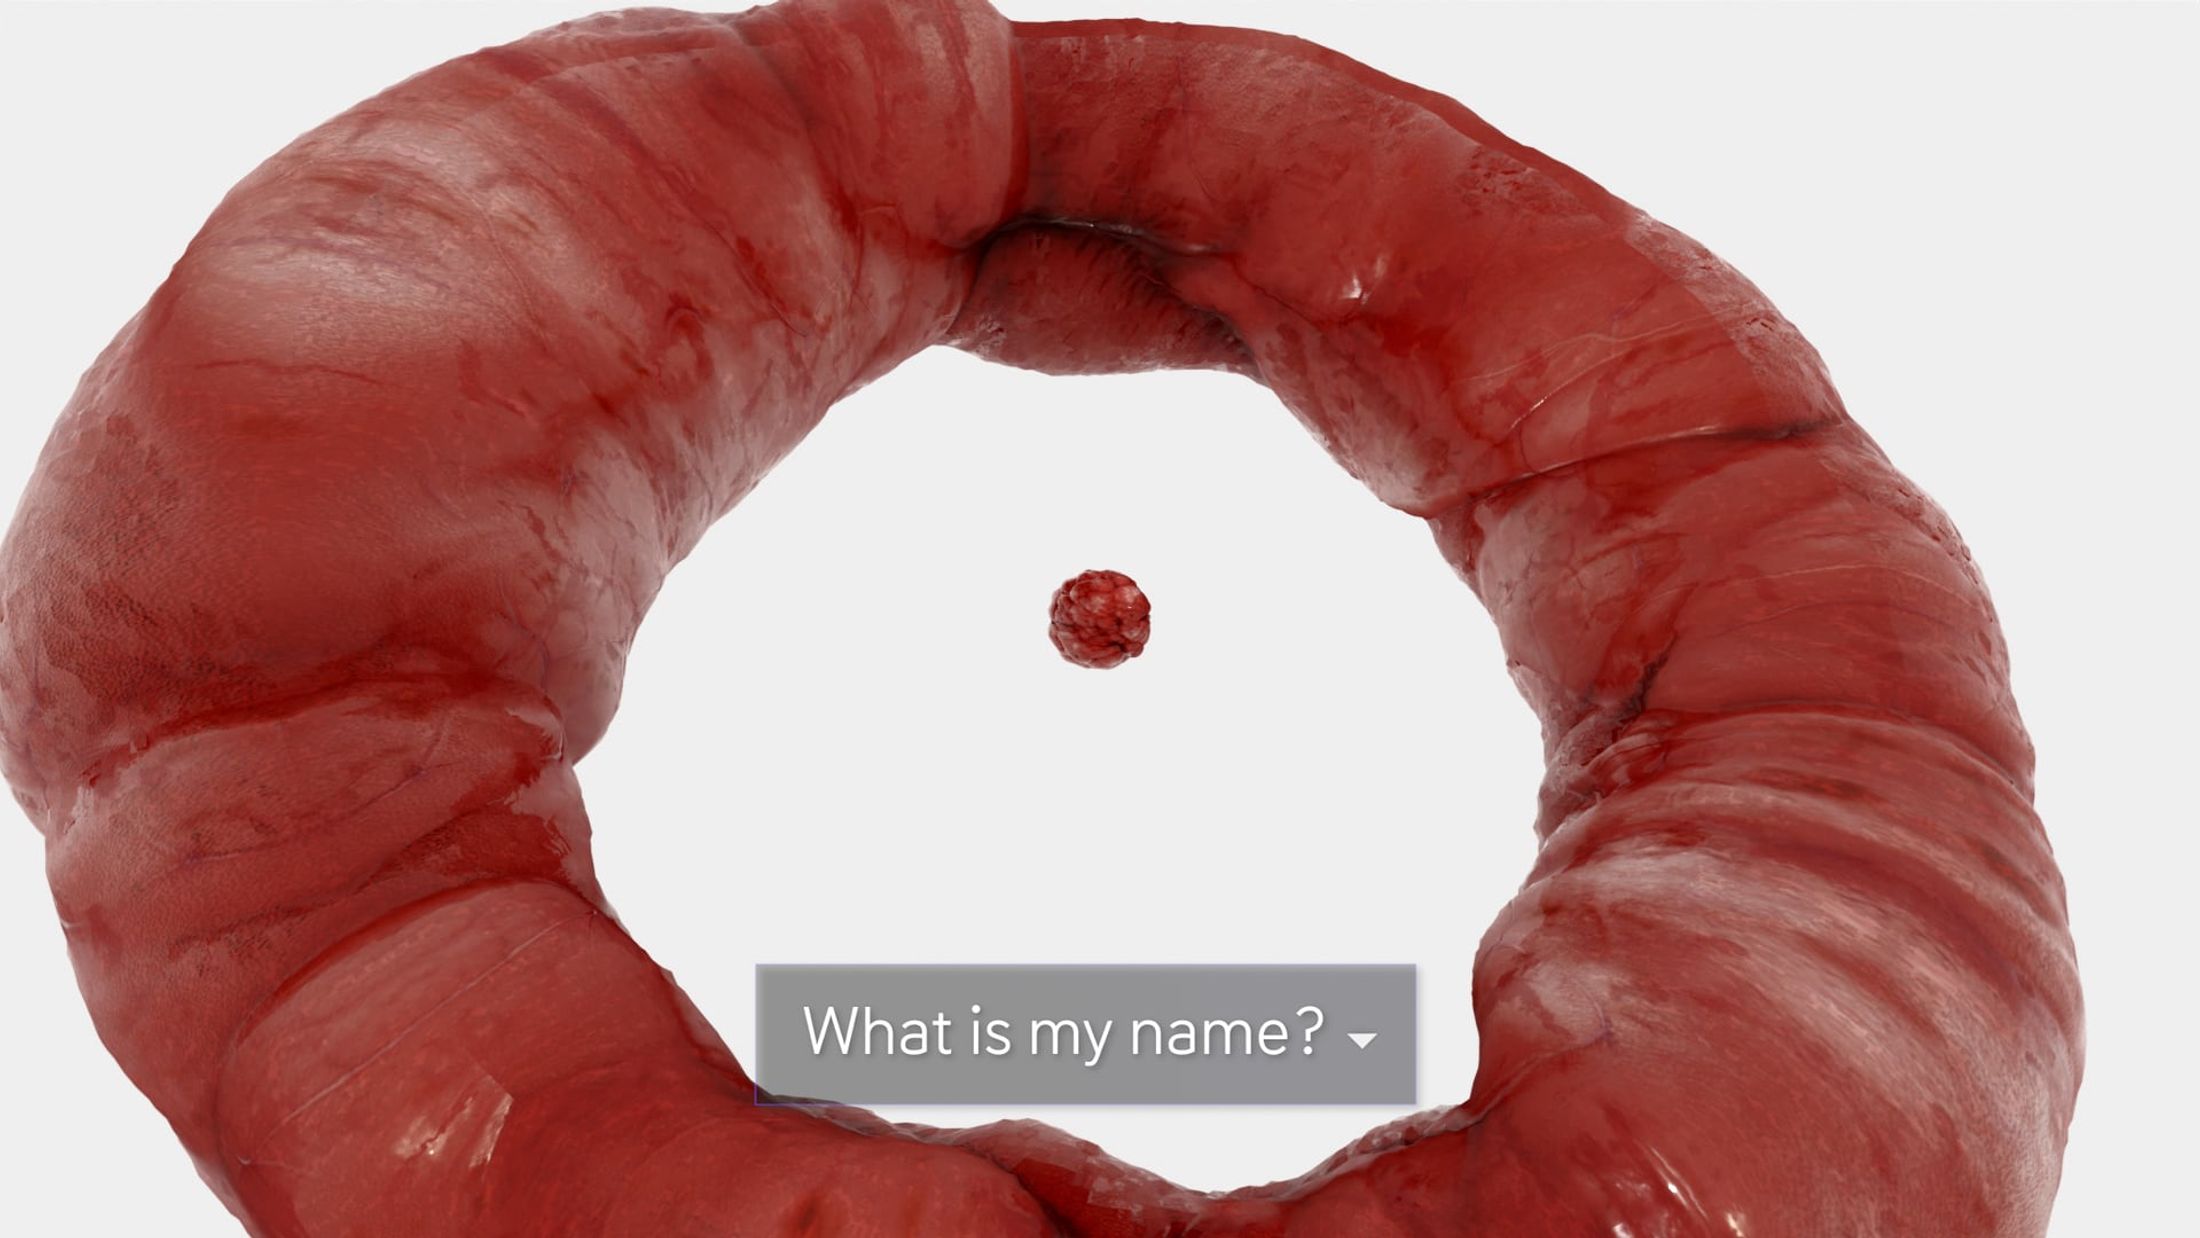 Still from Alison (2021) by Melle Nieling, a ring of flesh surrounds a sphere of flesh, a subtitle reads: 'What is my name?'